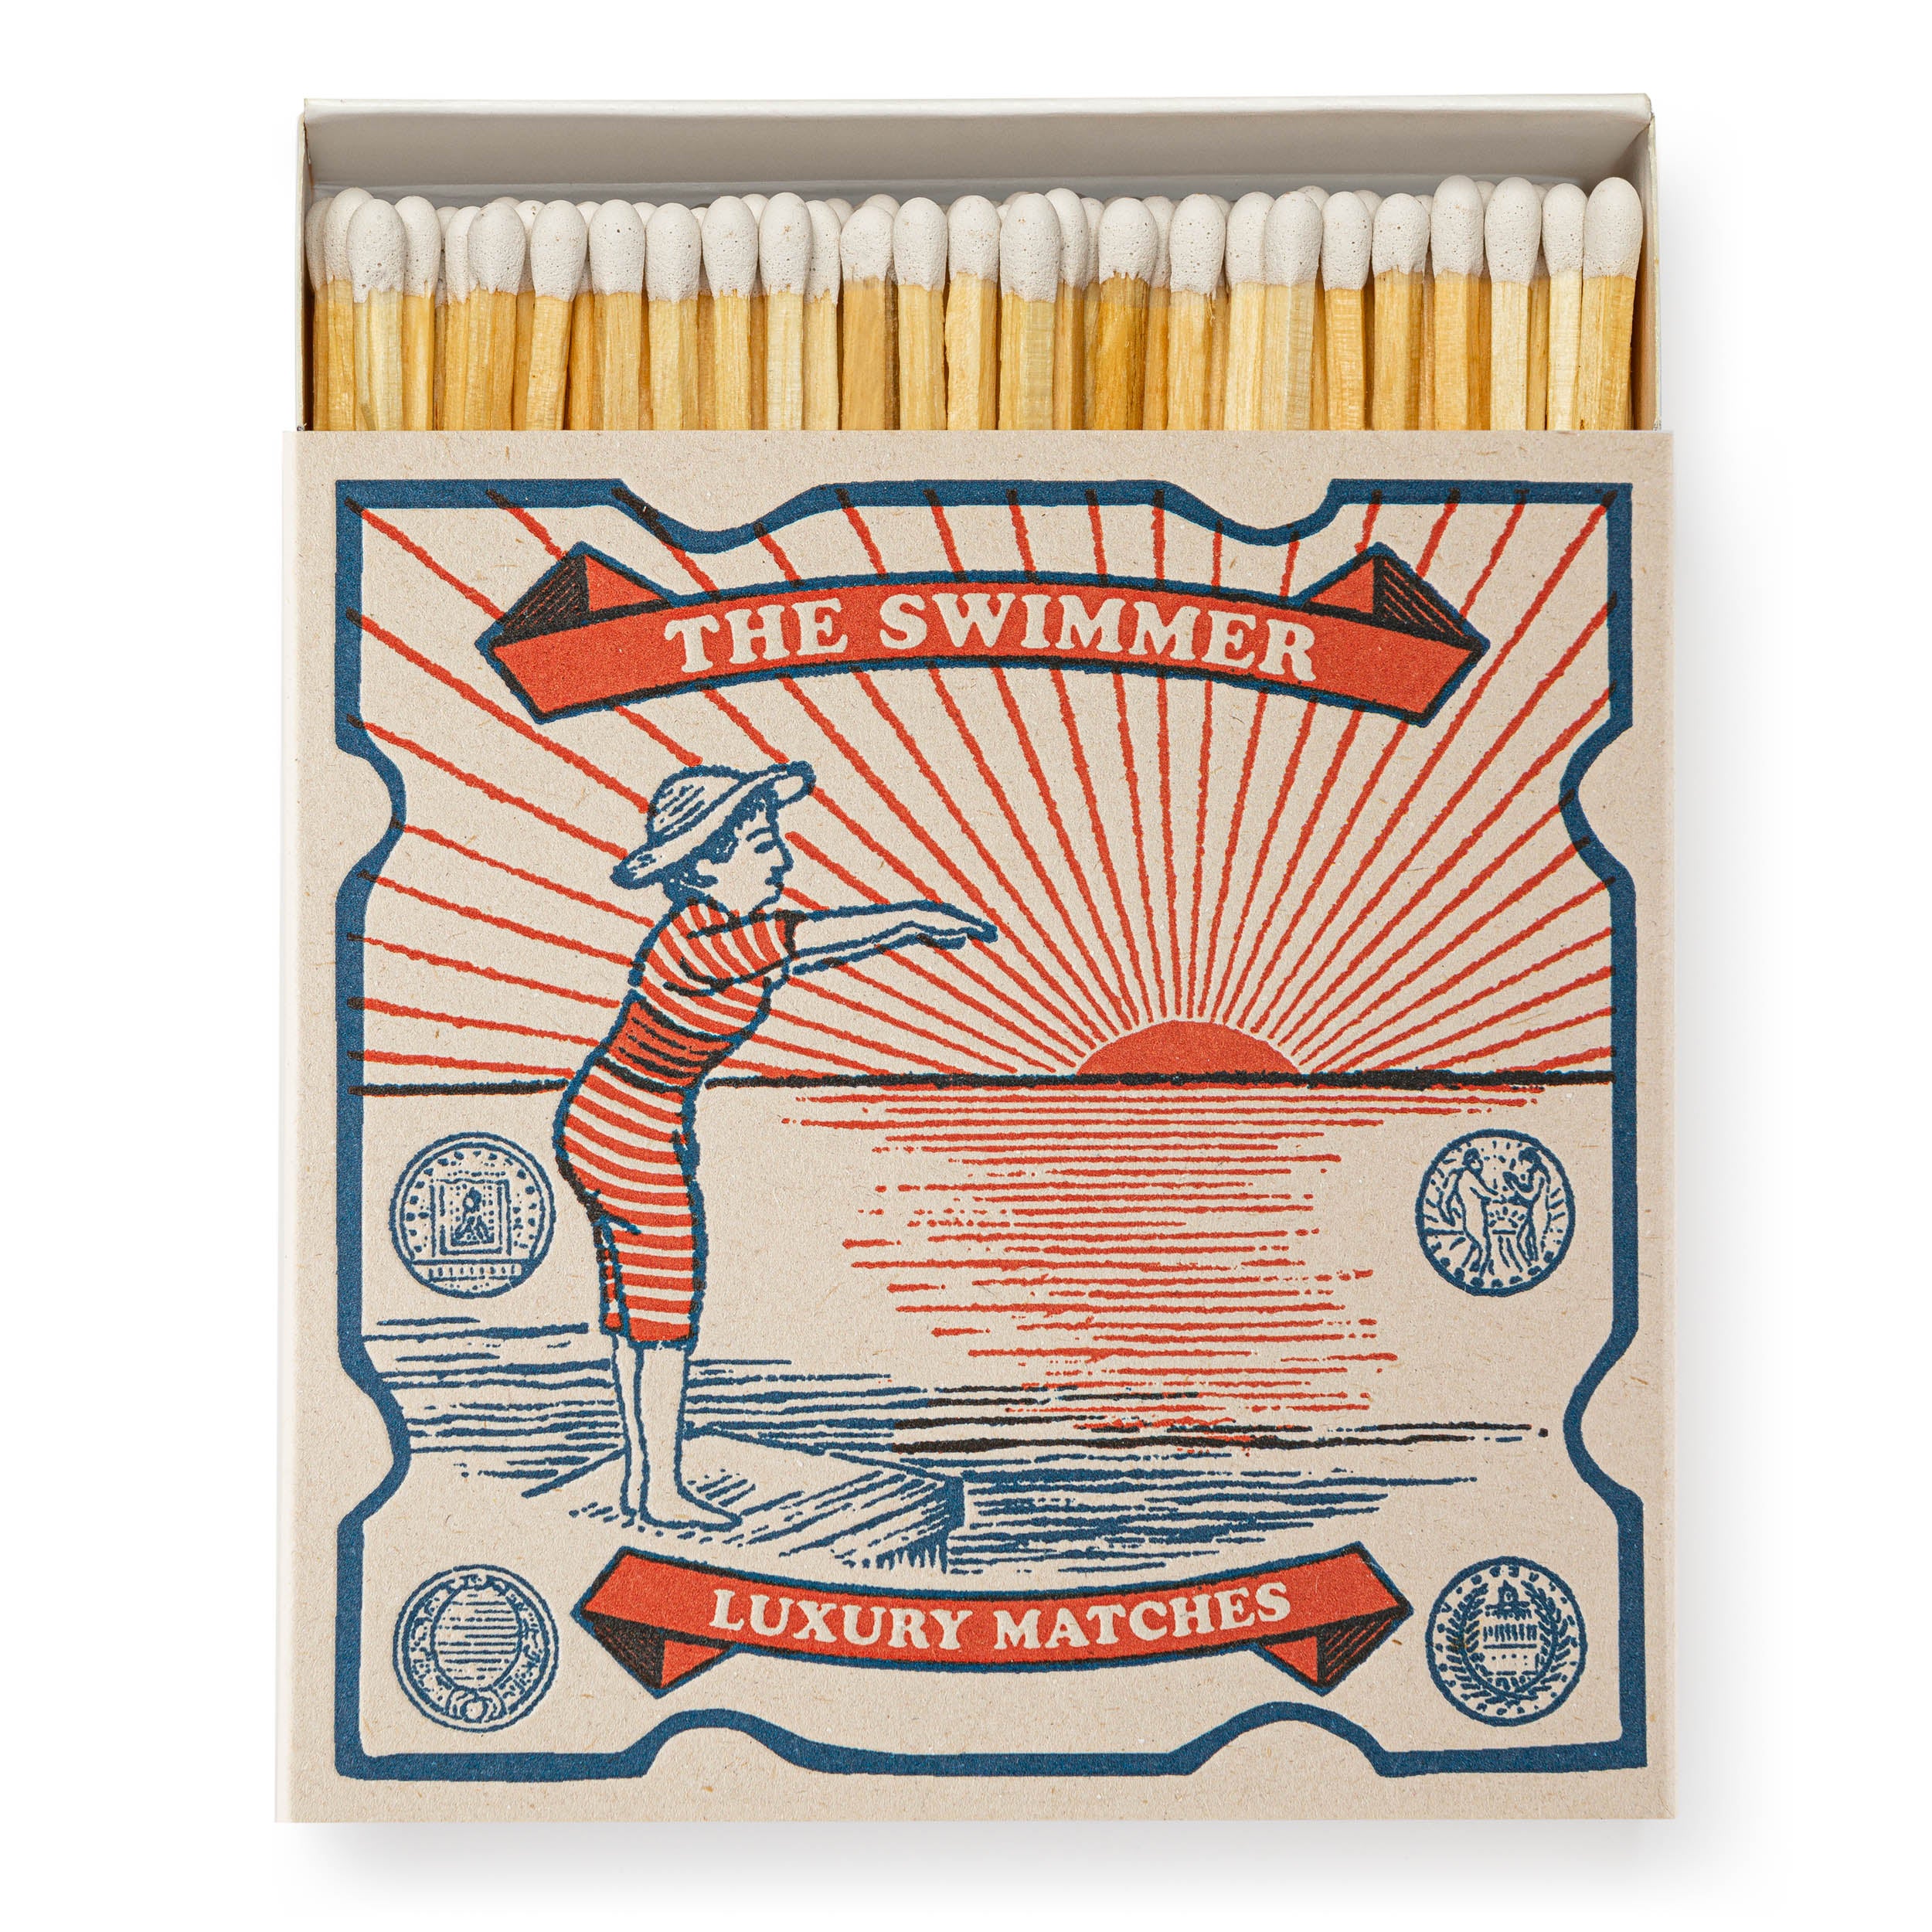 Archivist - The Swimmer Box of Matches